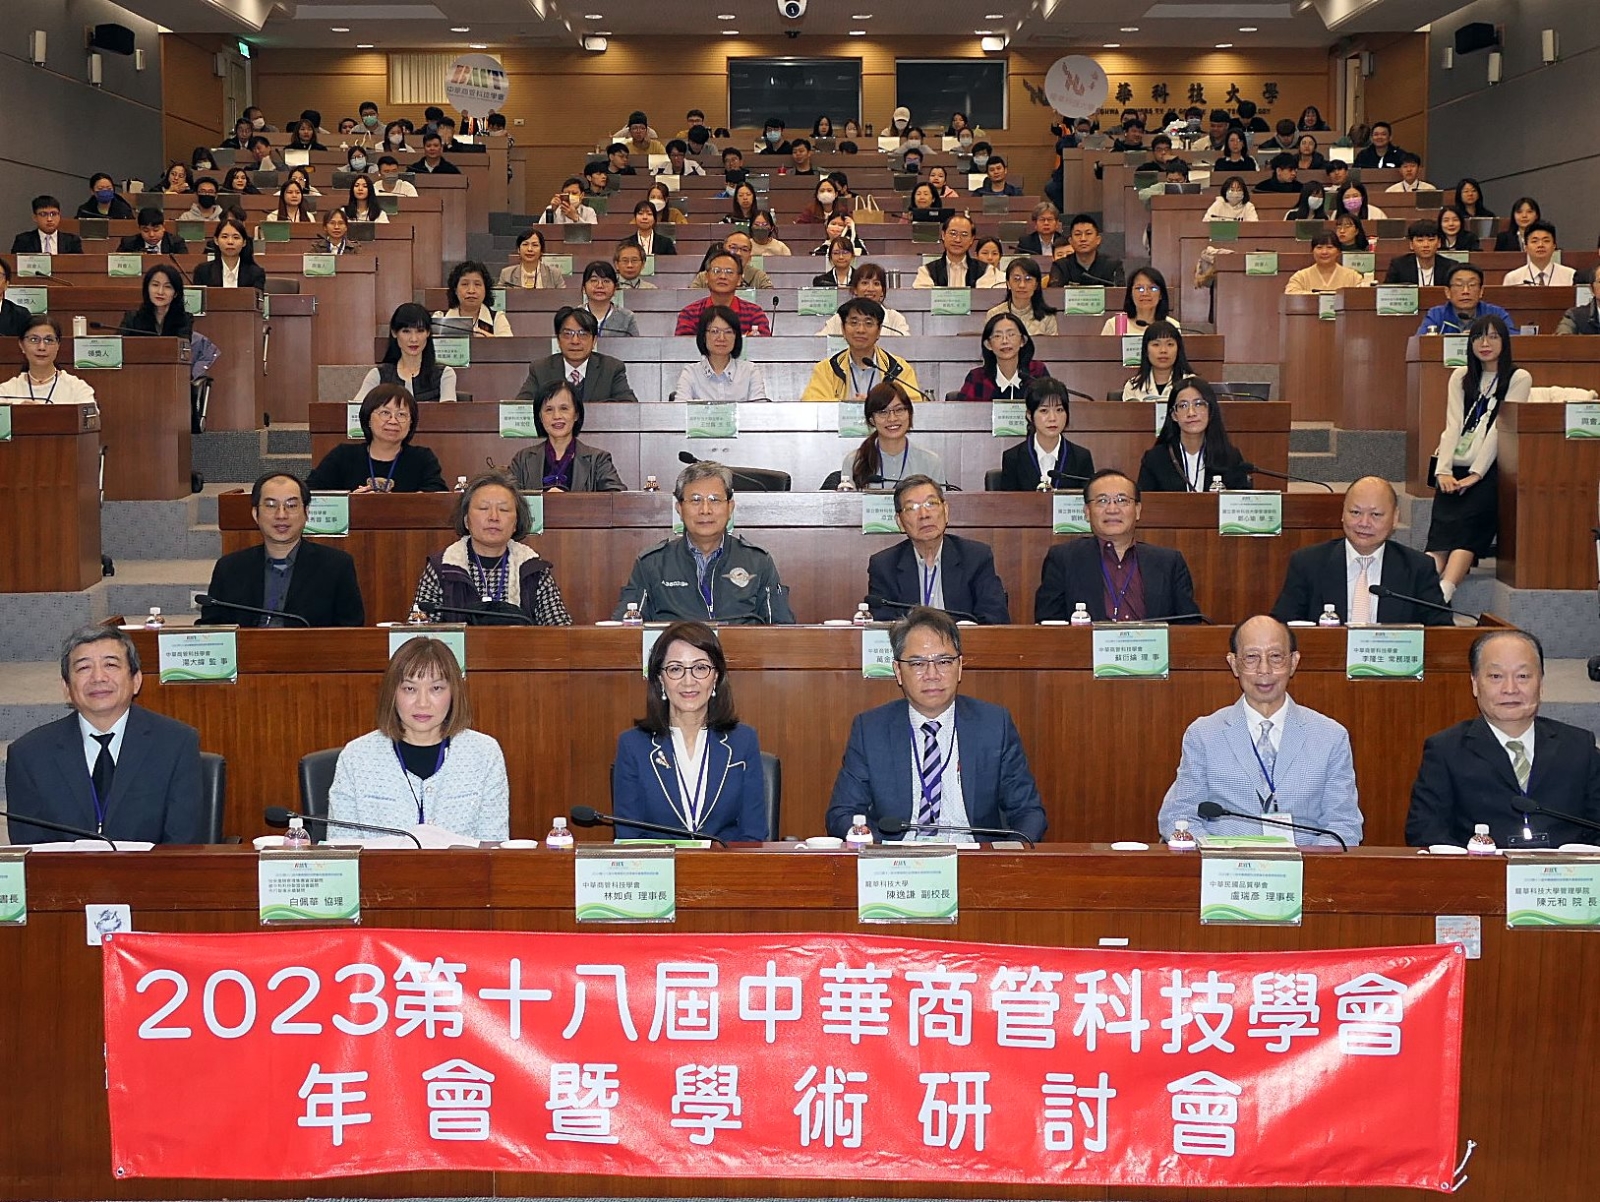 All attendees at the annual meeting and conference of the Chinese Association of Business and Management Technology organized by the College of Management at Lunghwa University took a photo.